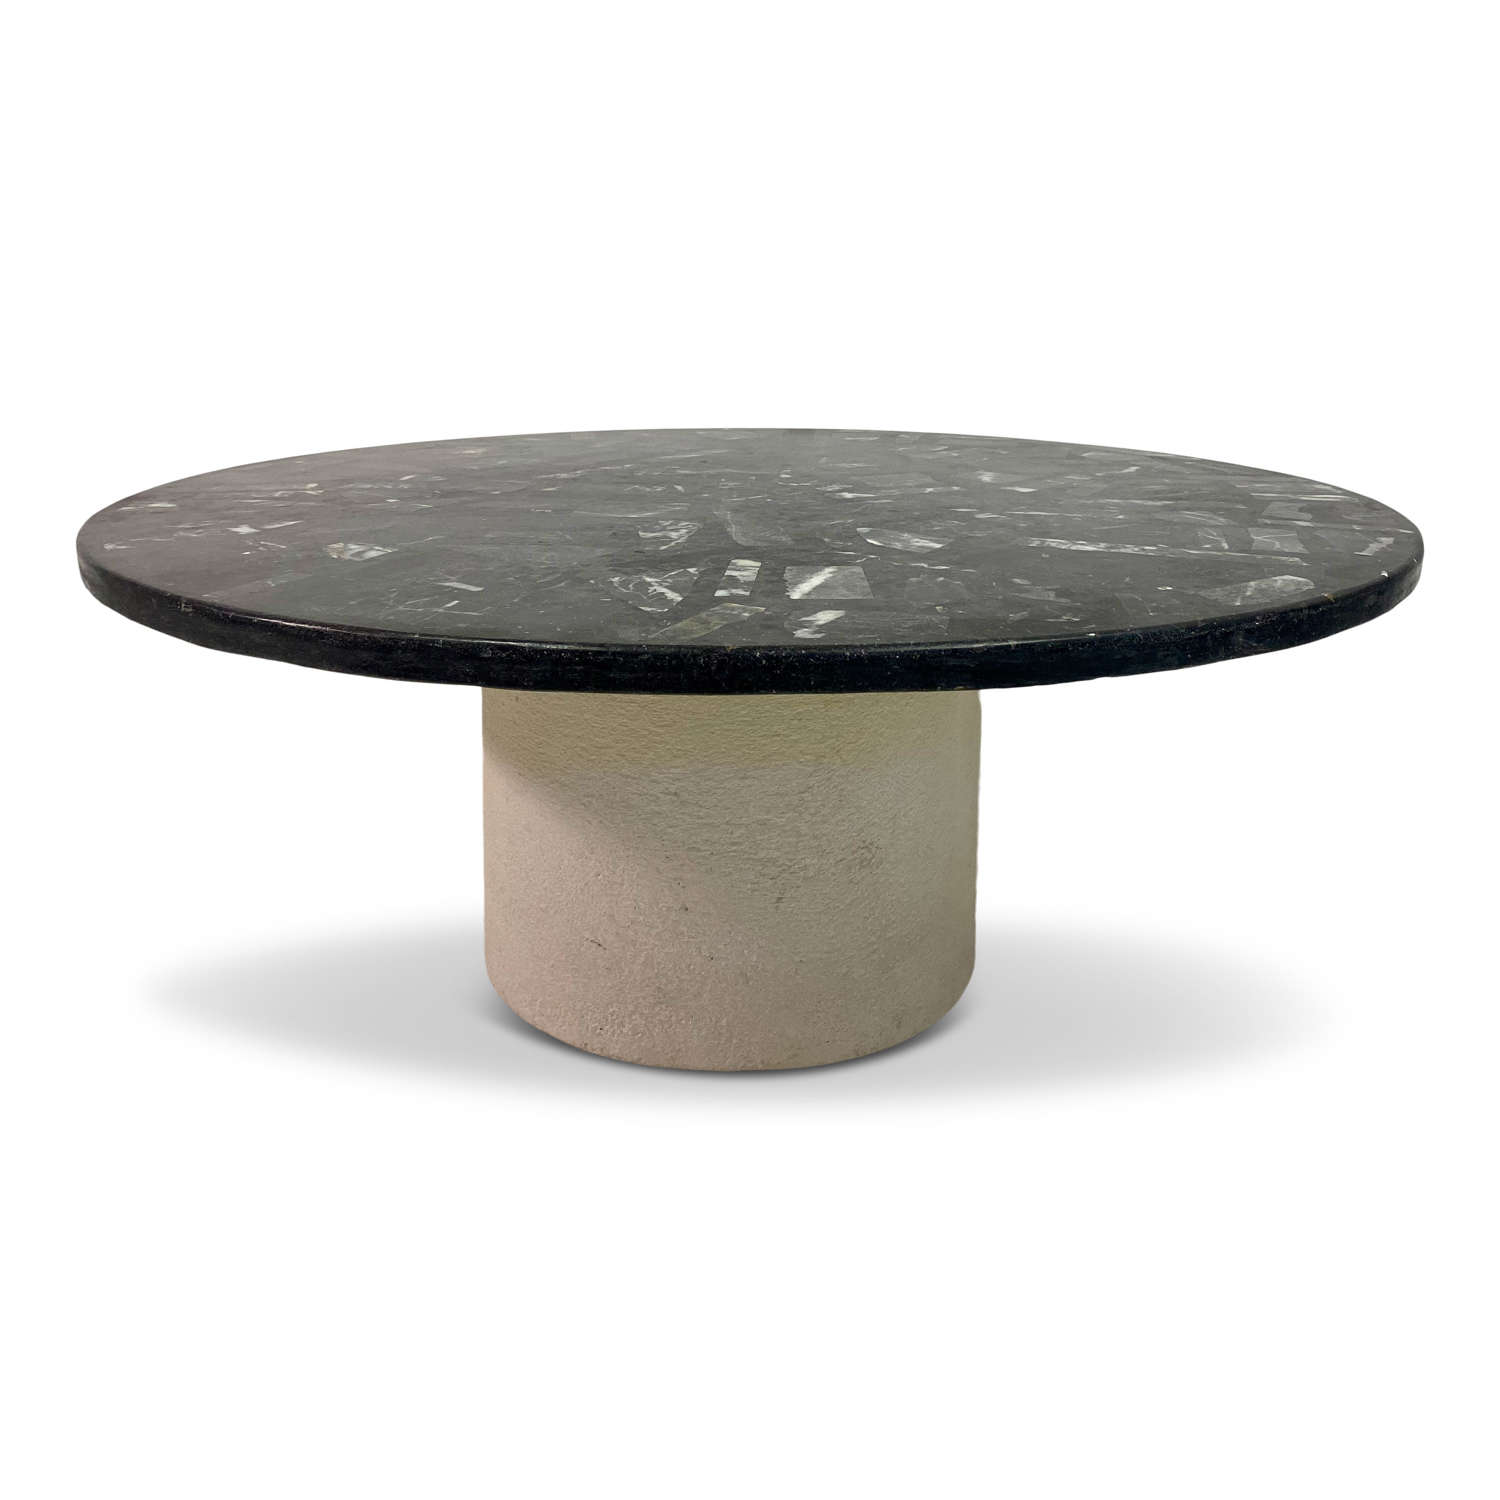 1980s Concrete and Black Stone Coffee Table